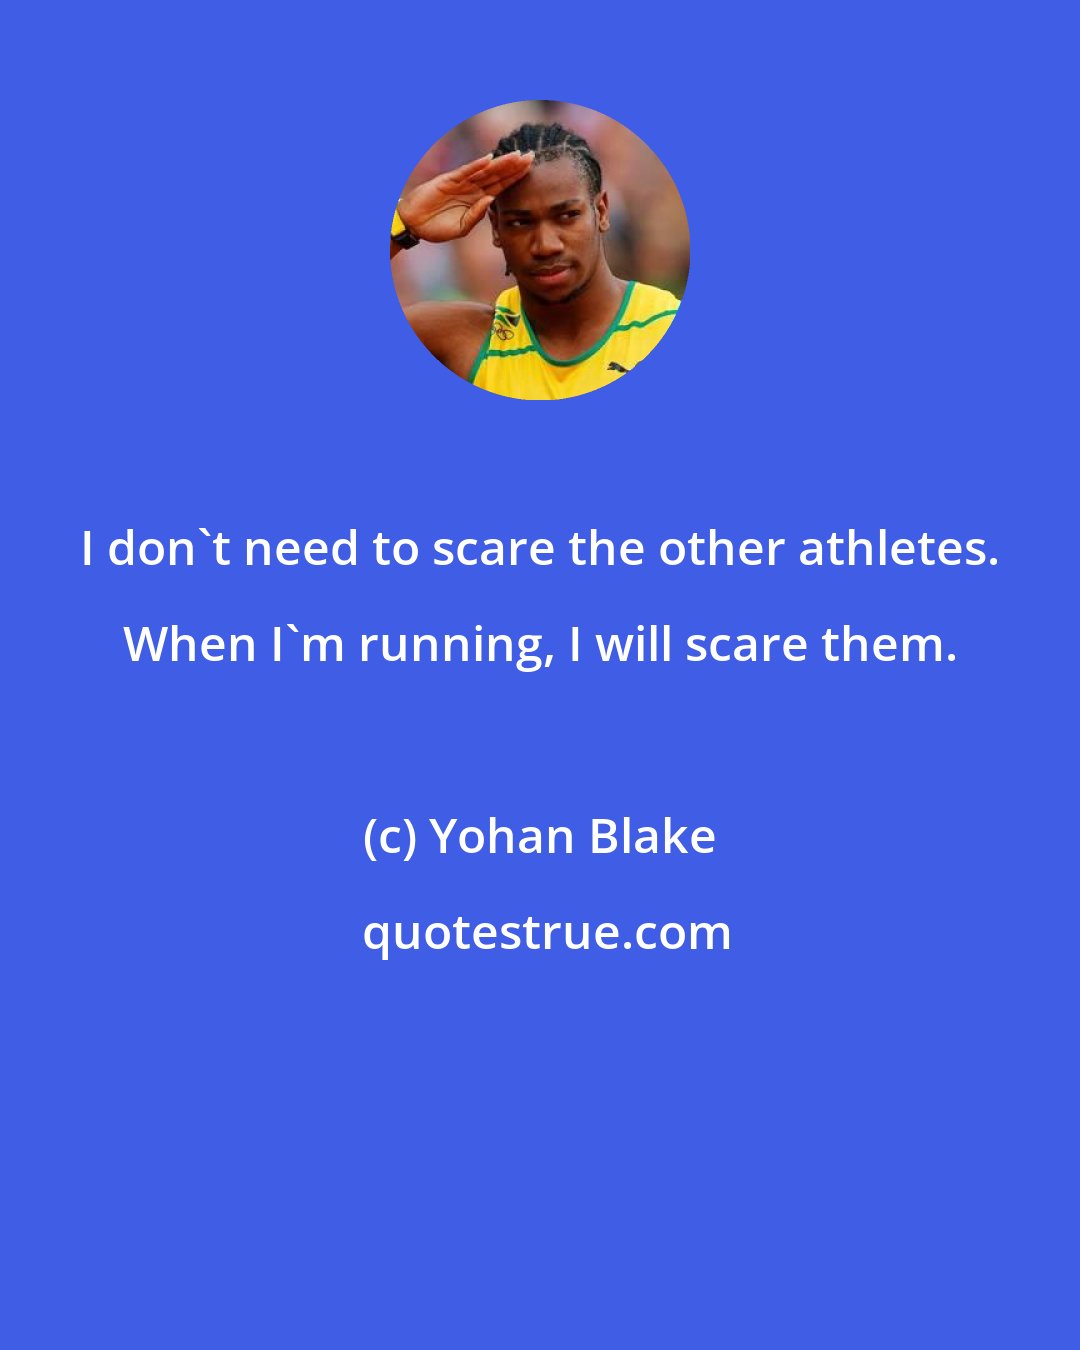 Yohan Blake: I don't need to scare the other athletes. When I'm running, I will scare them.